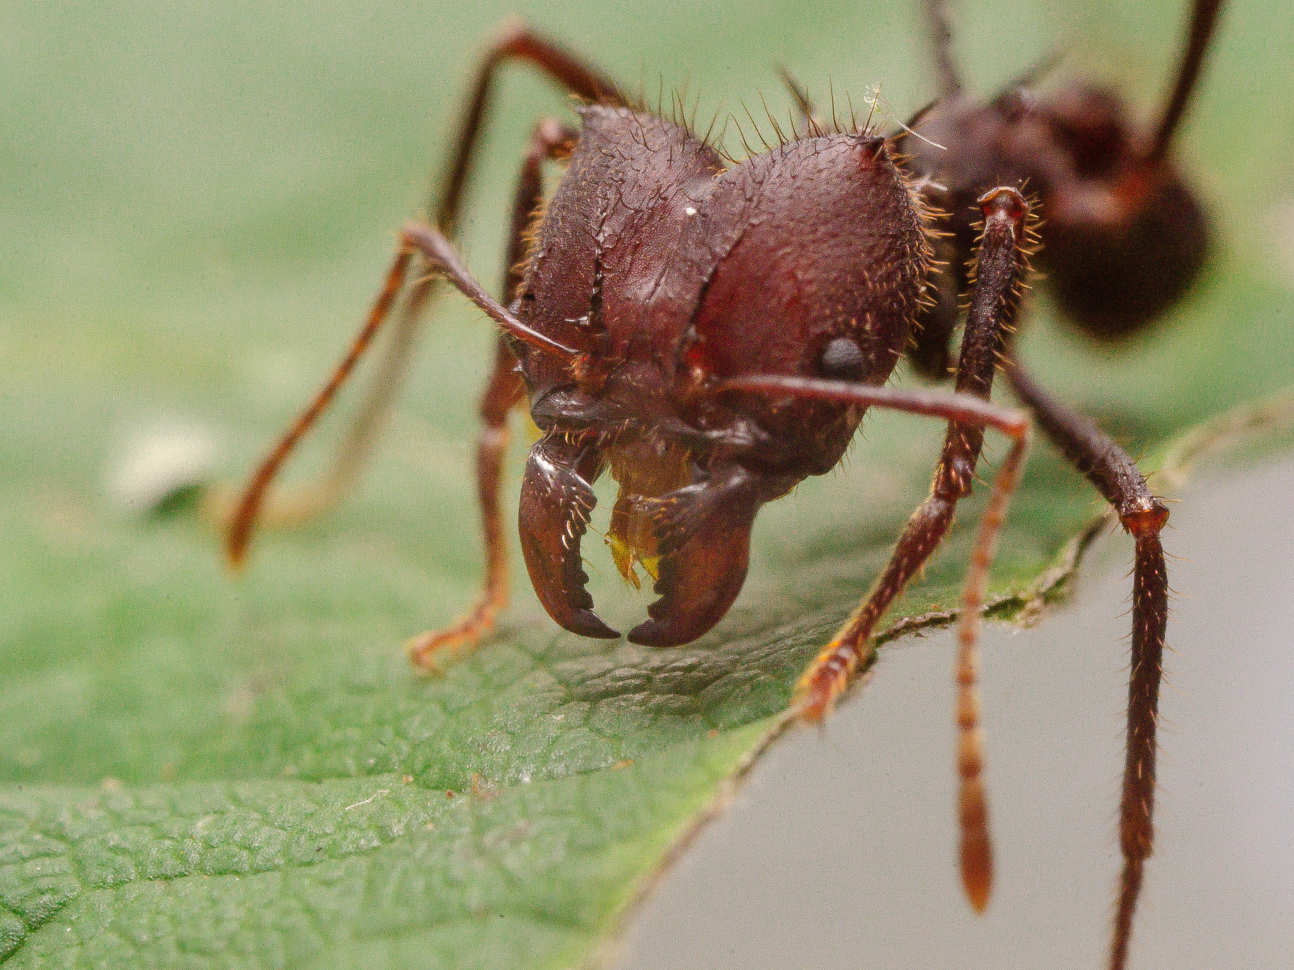 A close up image of an ant on a leaf